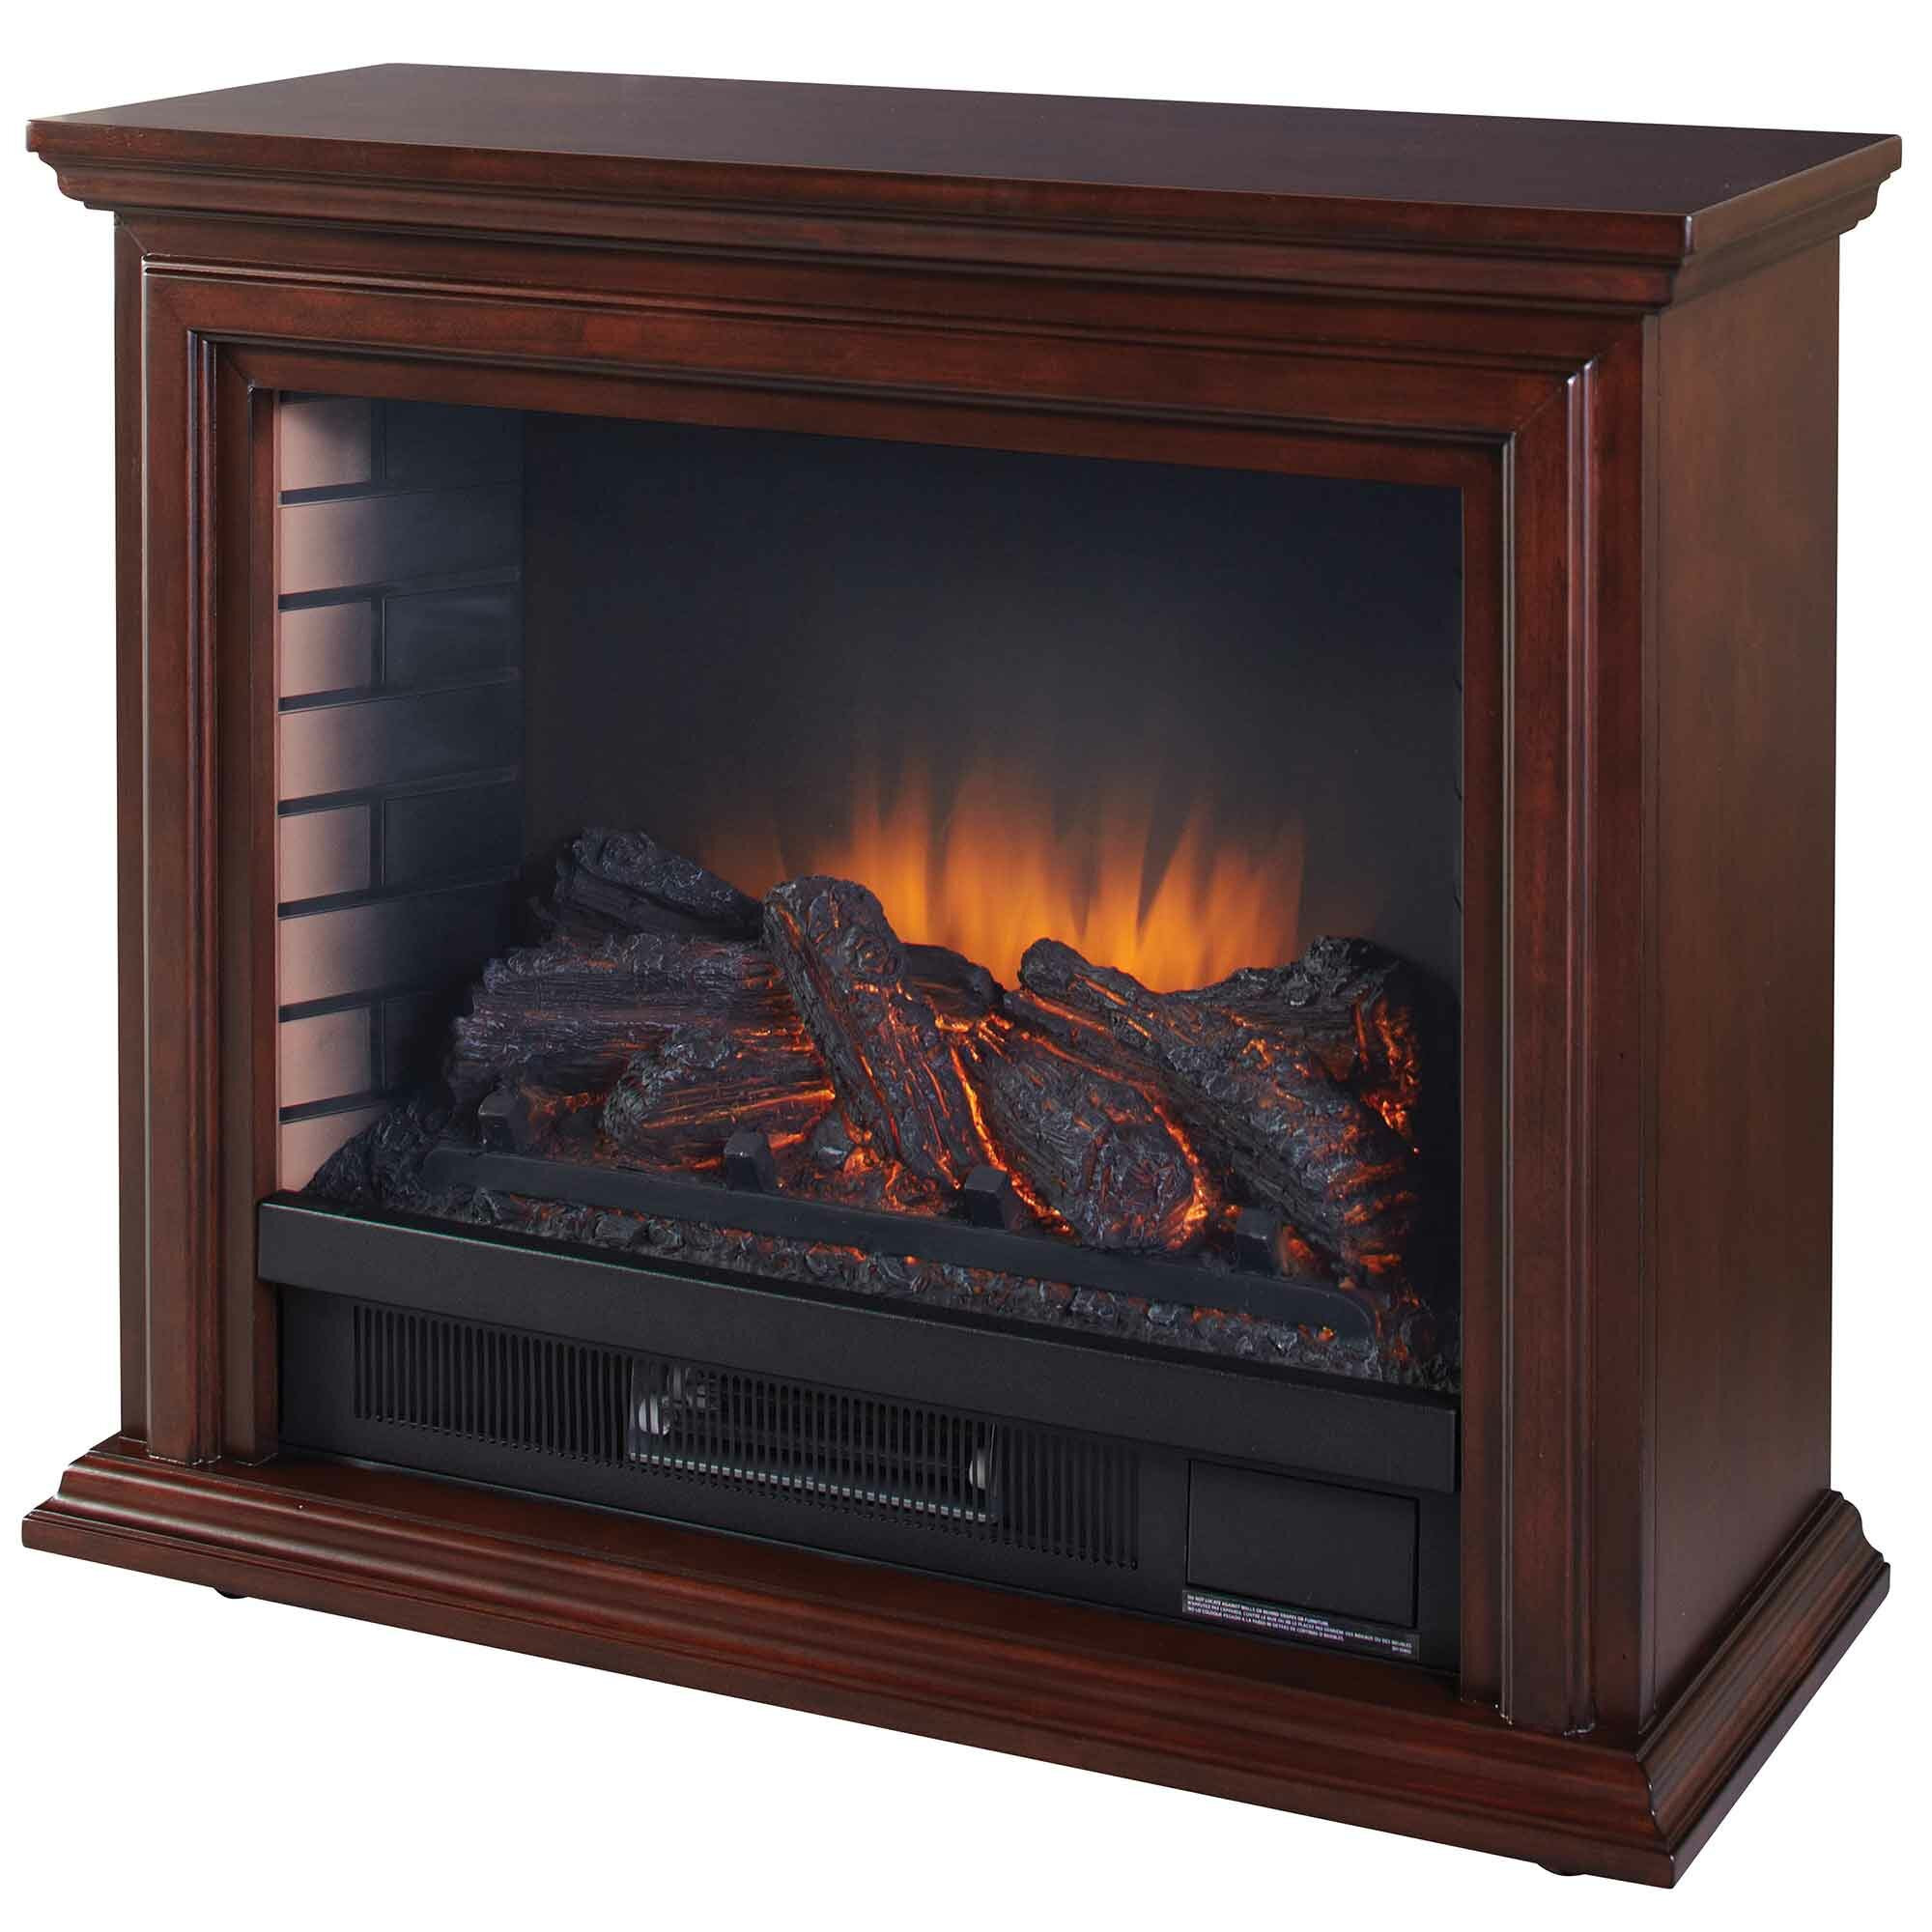 Pleasant Hearth Electric Fireplace
 Pleasant Hearth Mobile Electric Fireplace & Reviews